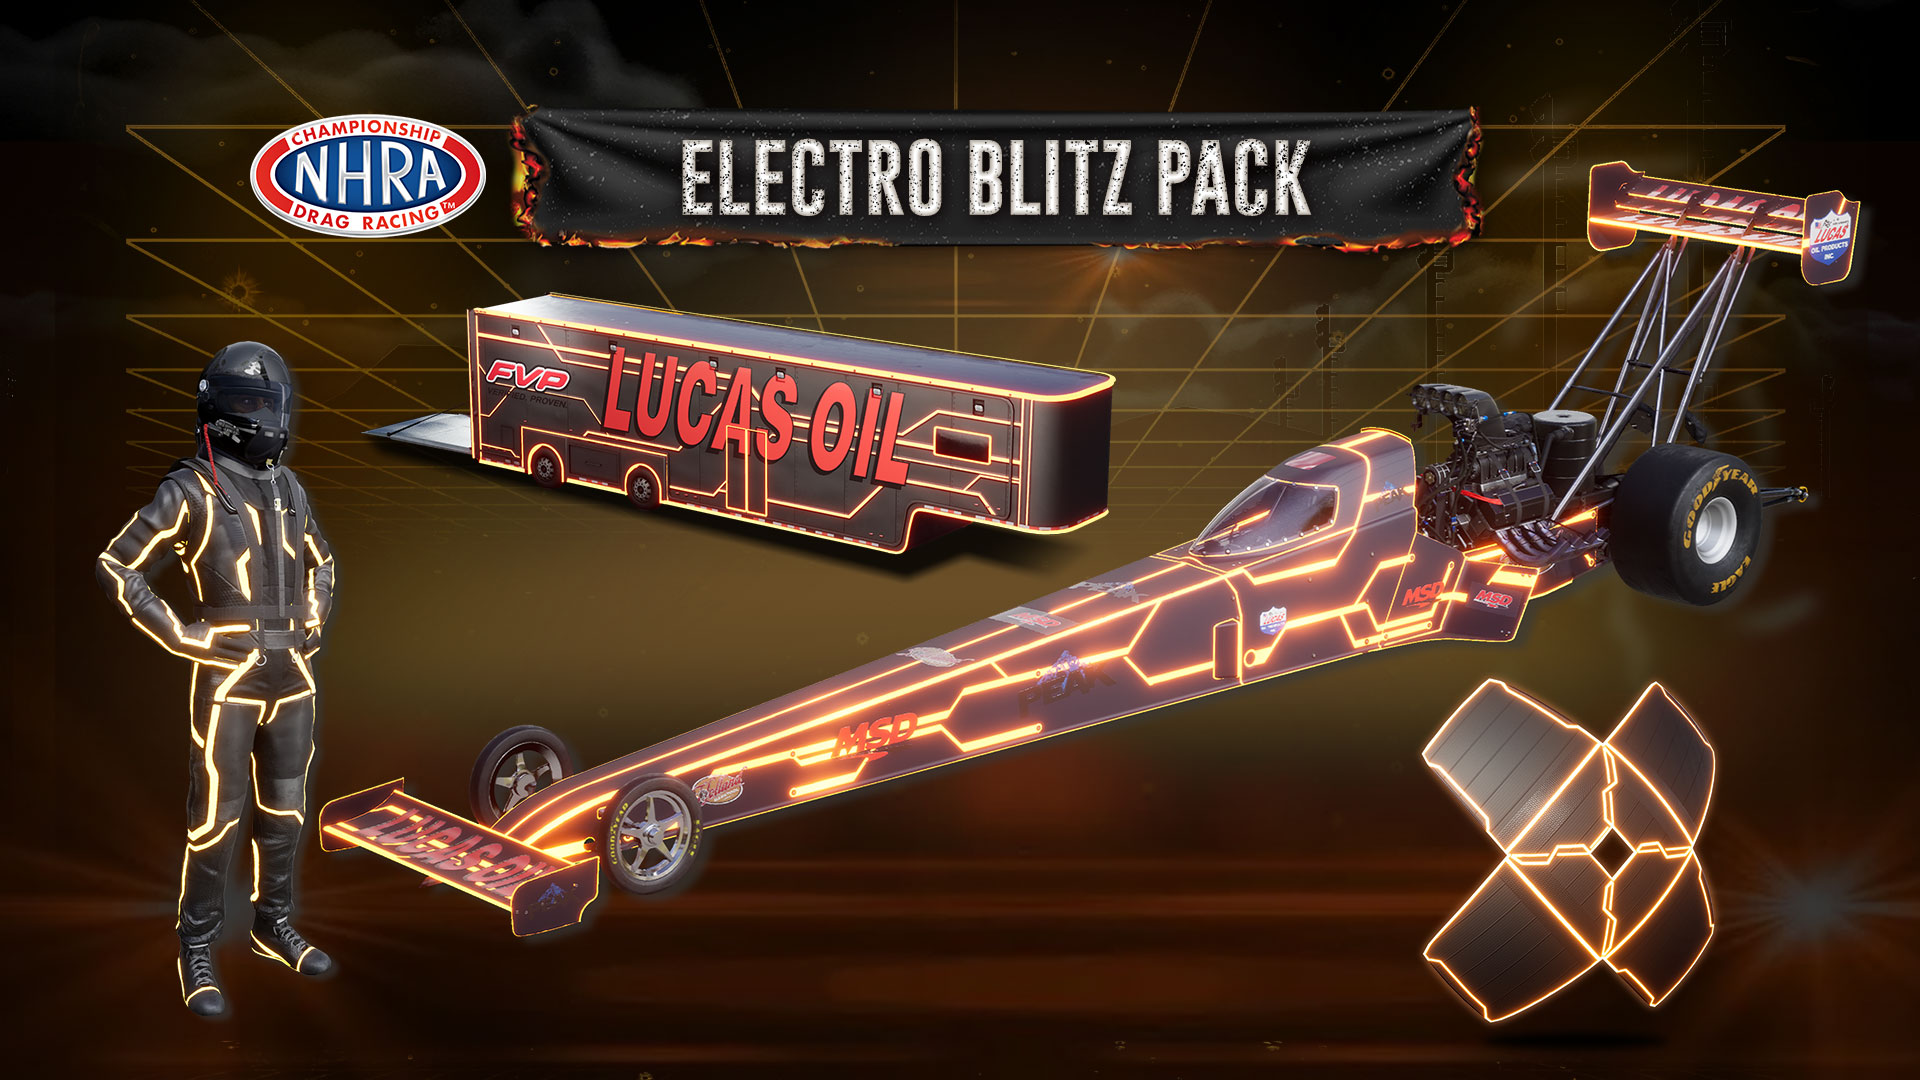 NHRA Championship Drag Racing: Speed for All - Electro Blitz Pack